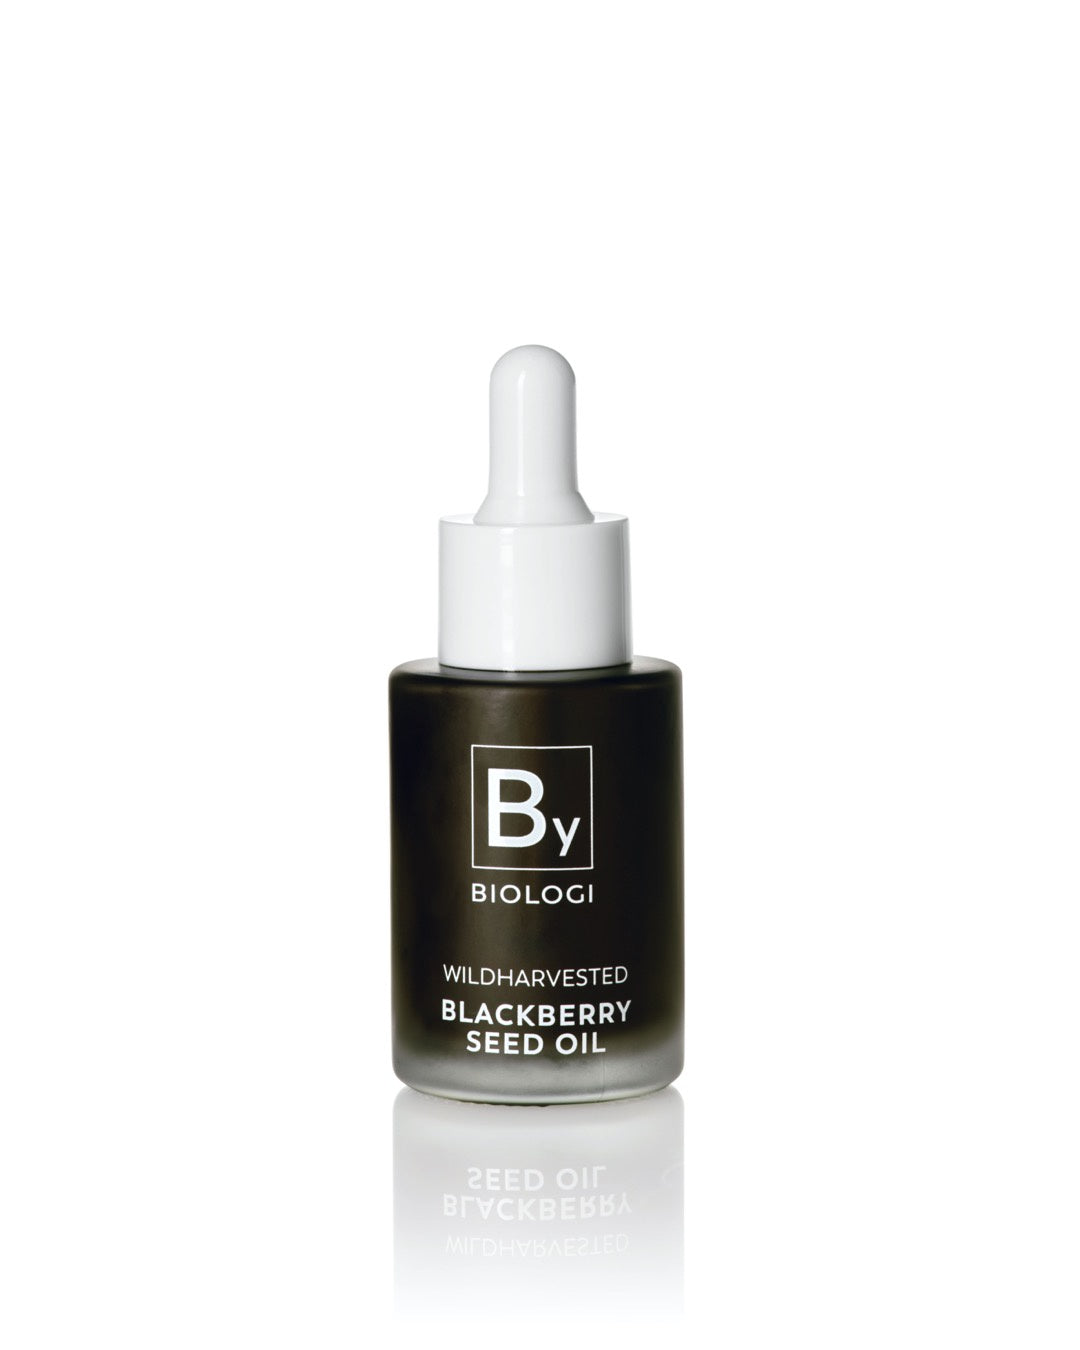 By - Blackberry Seed Oil Skincare by Biologi - Prae Store